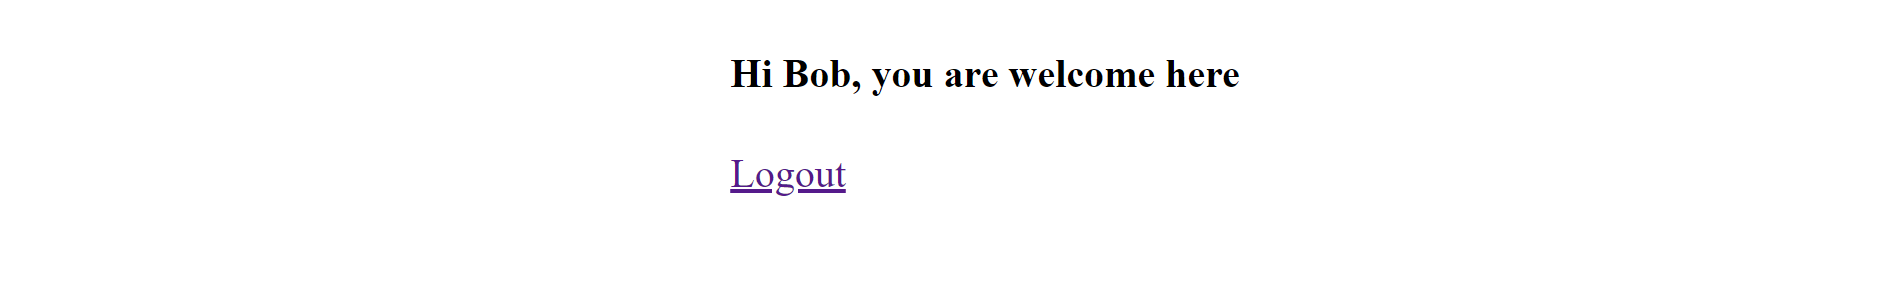 A welcome page